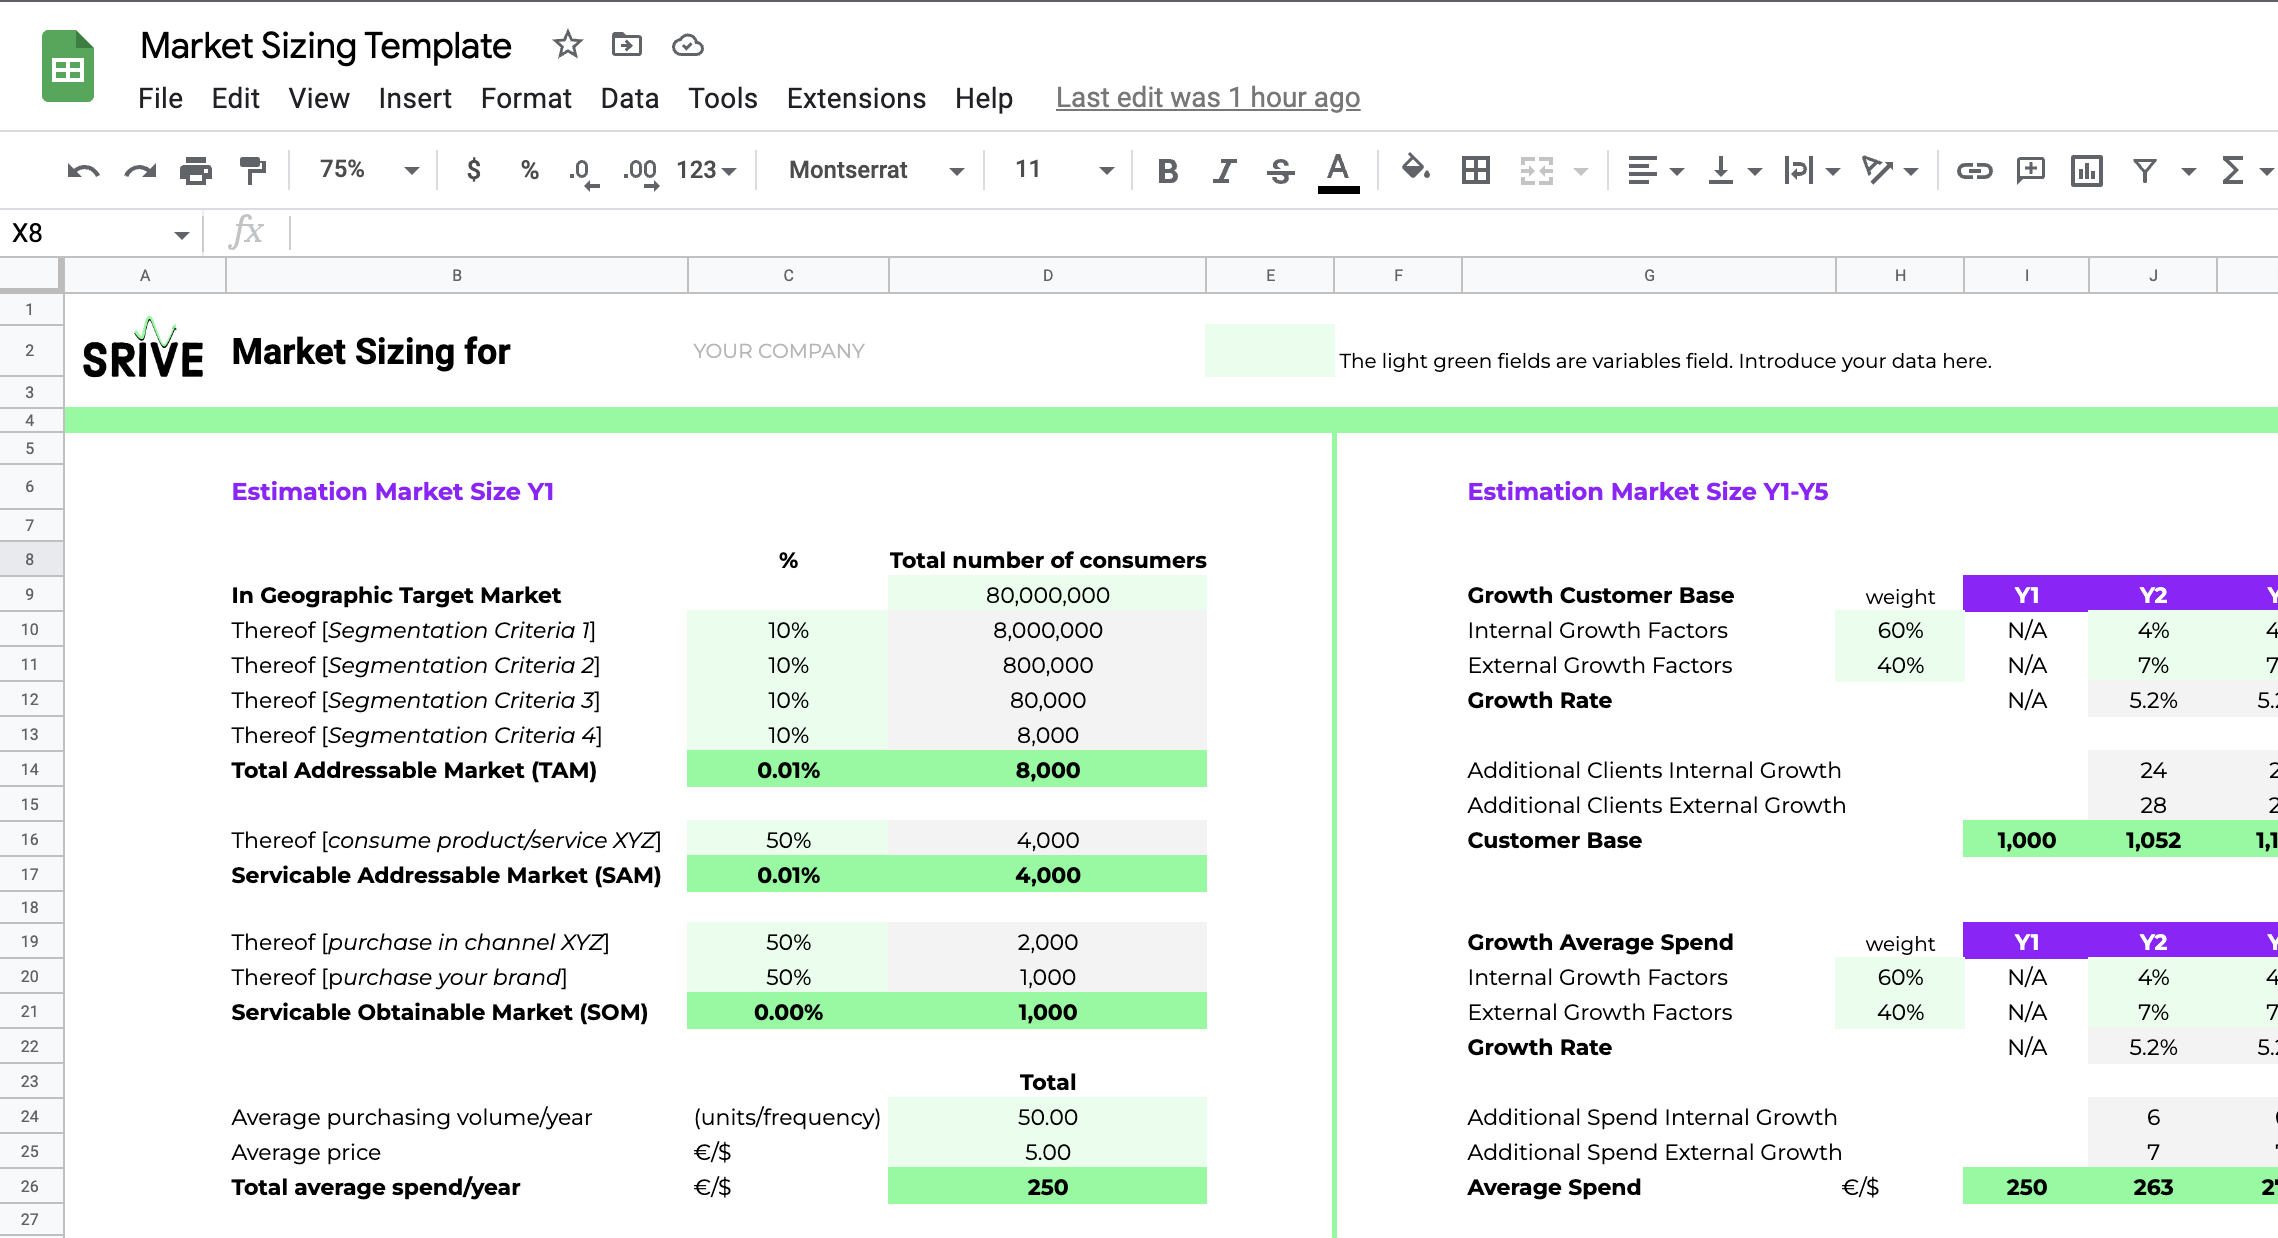 This image shows an example of the market sizing spreadsheet template